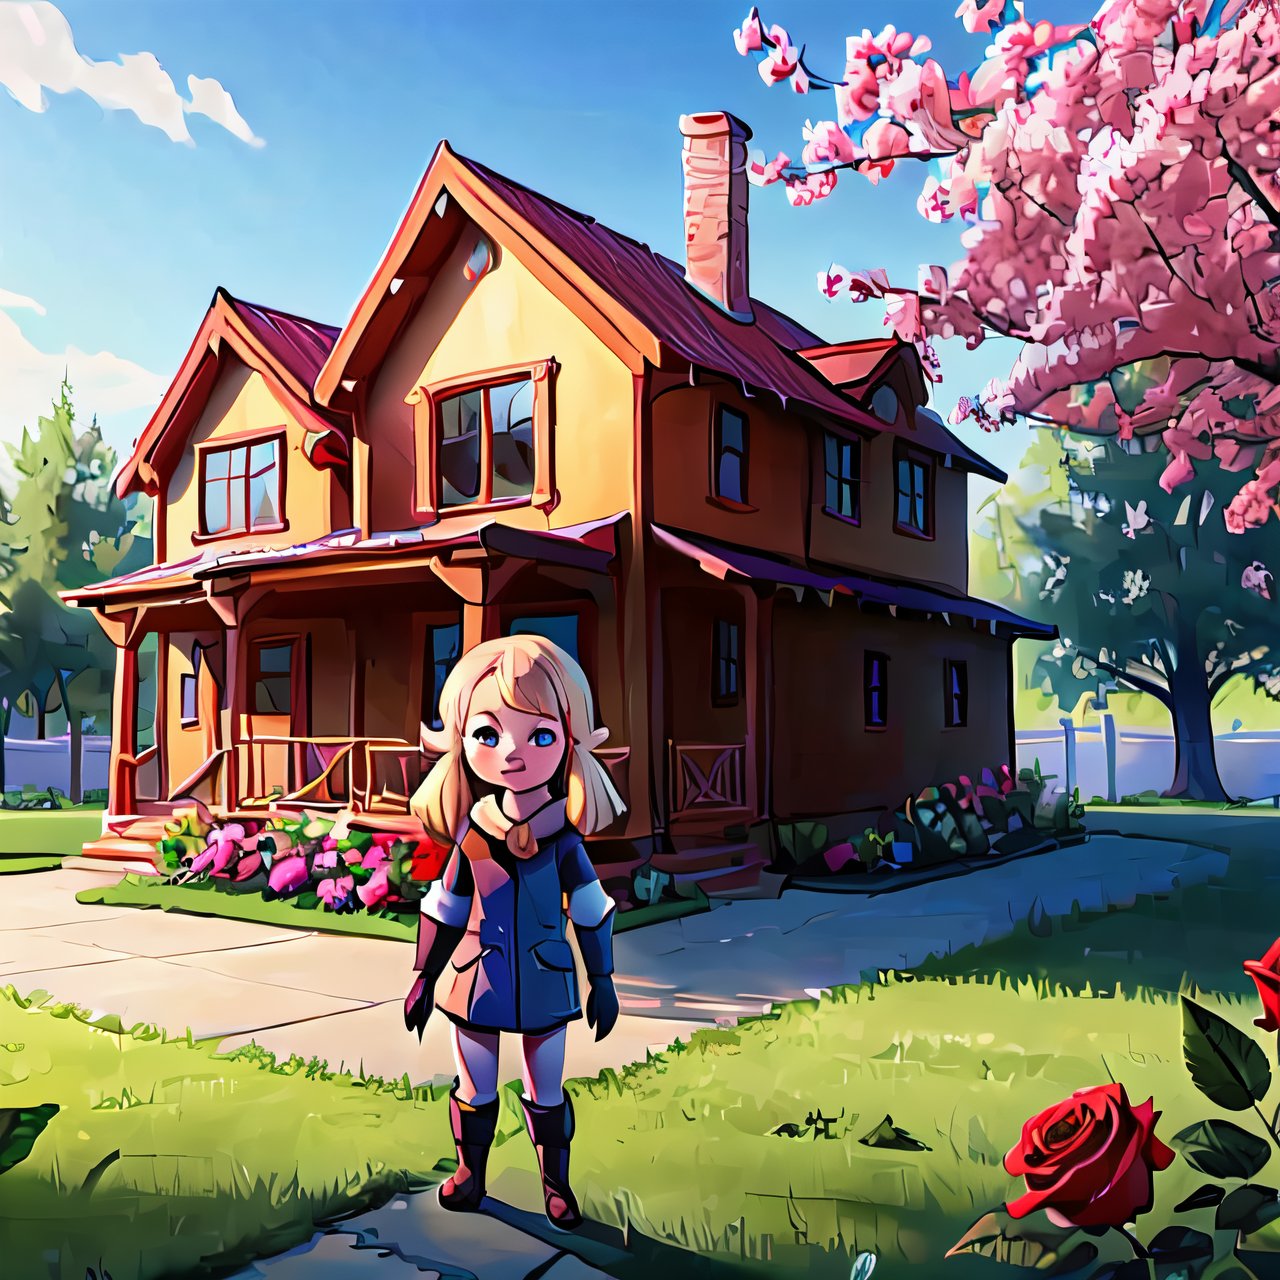 A beautiful (little child kleedef), (child kleedef), (3 years old kleedef) stands in front of a beautiful and fantastic house. The house is surrounded by roses and trees